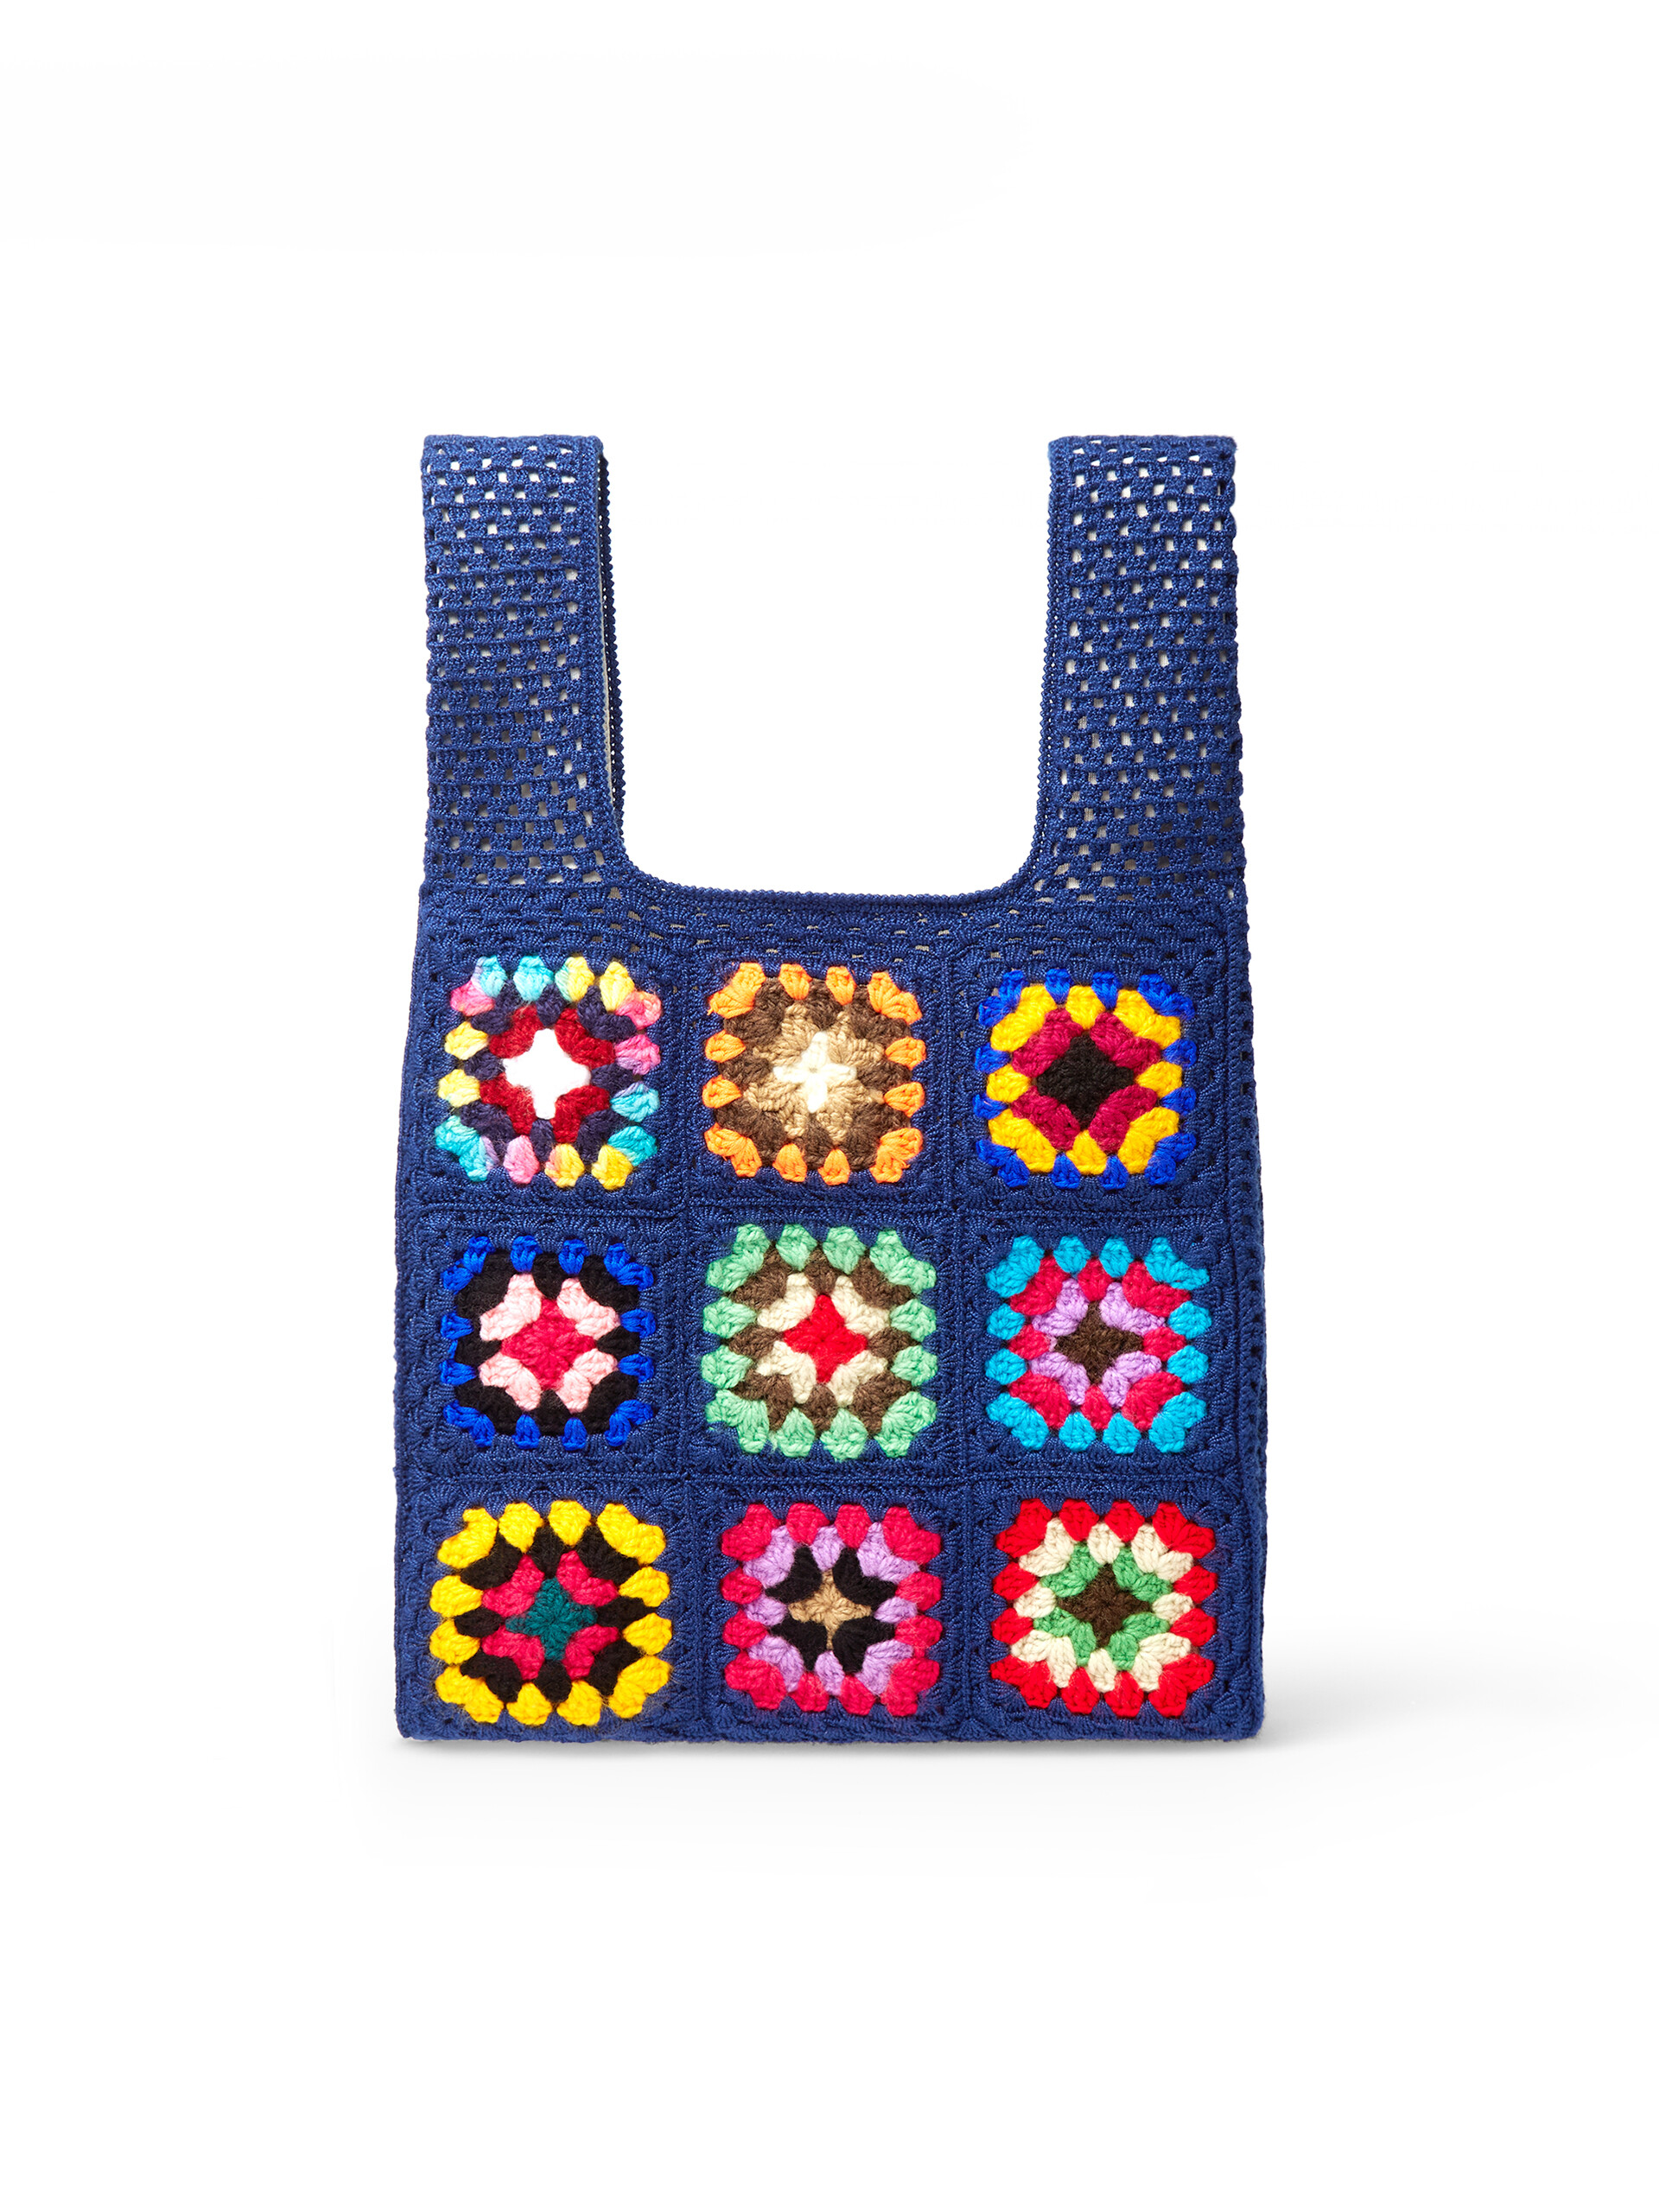 MARNI MARKET FISH bag in white and blue crochet - Bags - Image 3